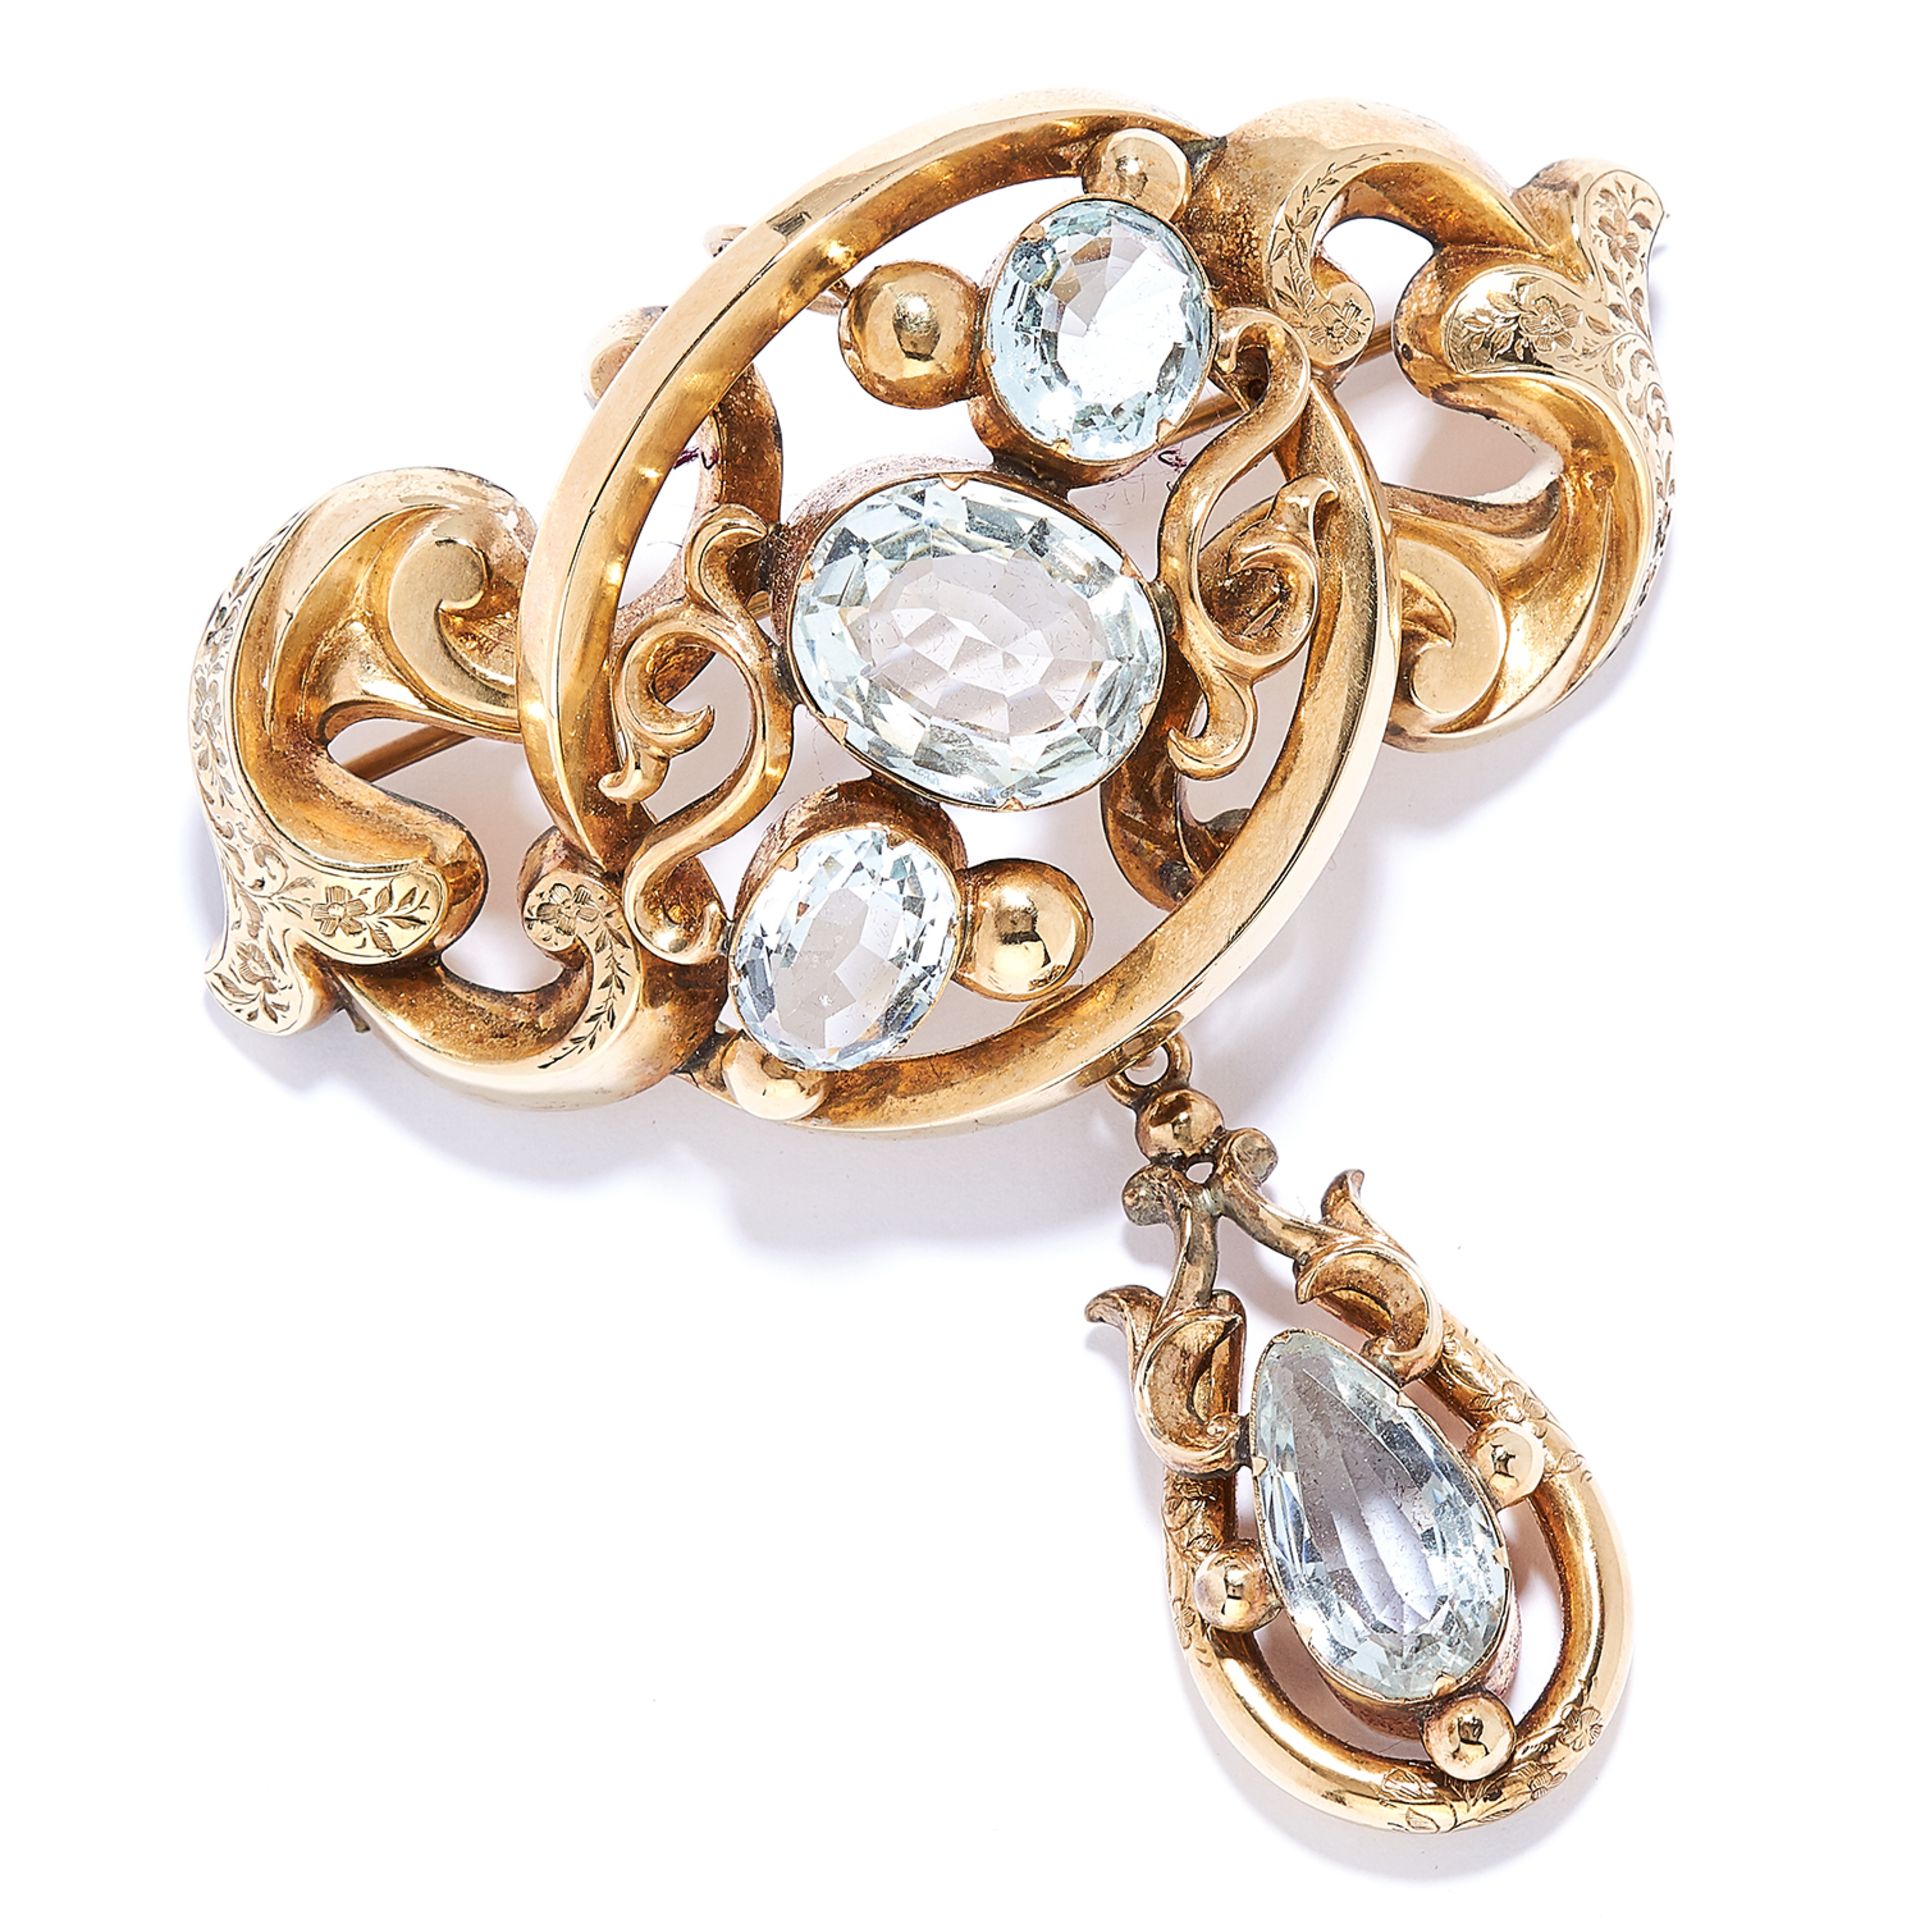 ANTIQUE AQUAMARINE BROOCH / PENDANT, 19TH CENTURY in high carat yellow gold, set with three oval cut